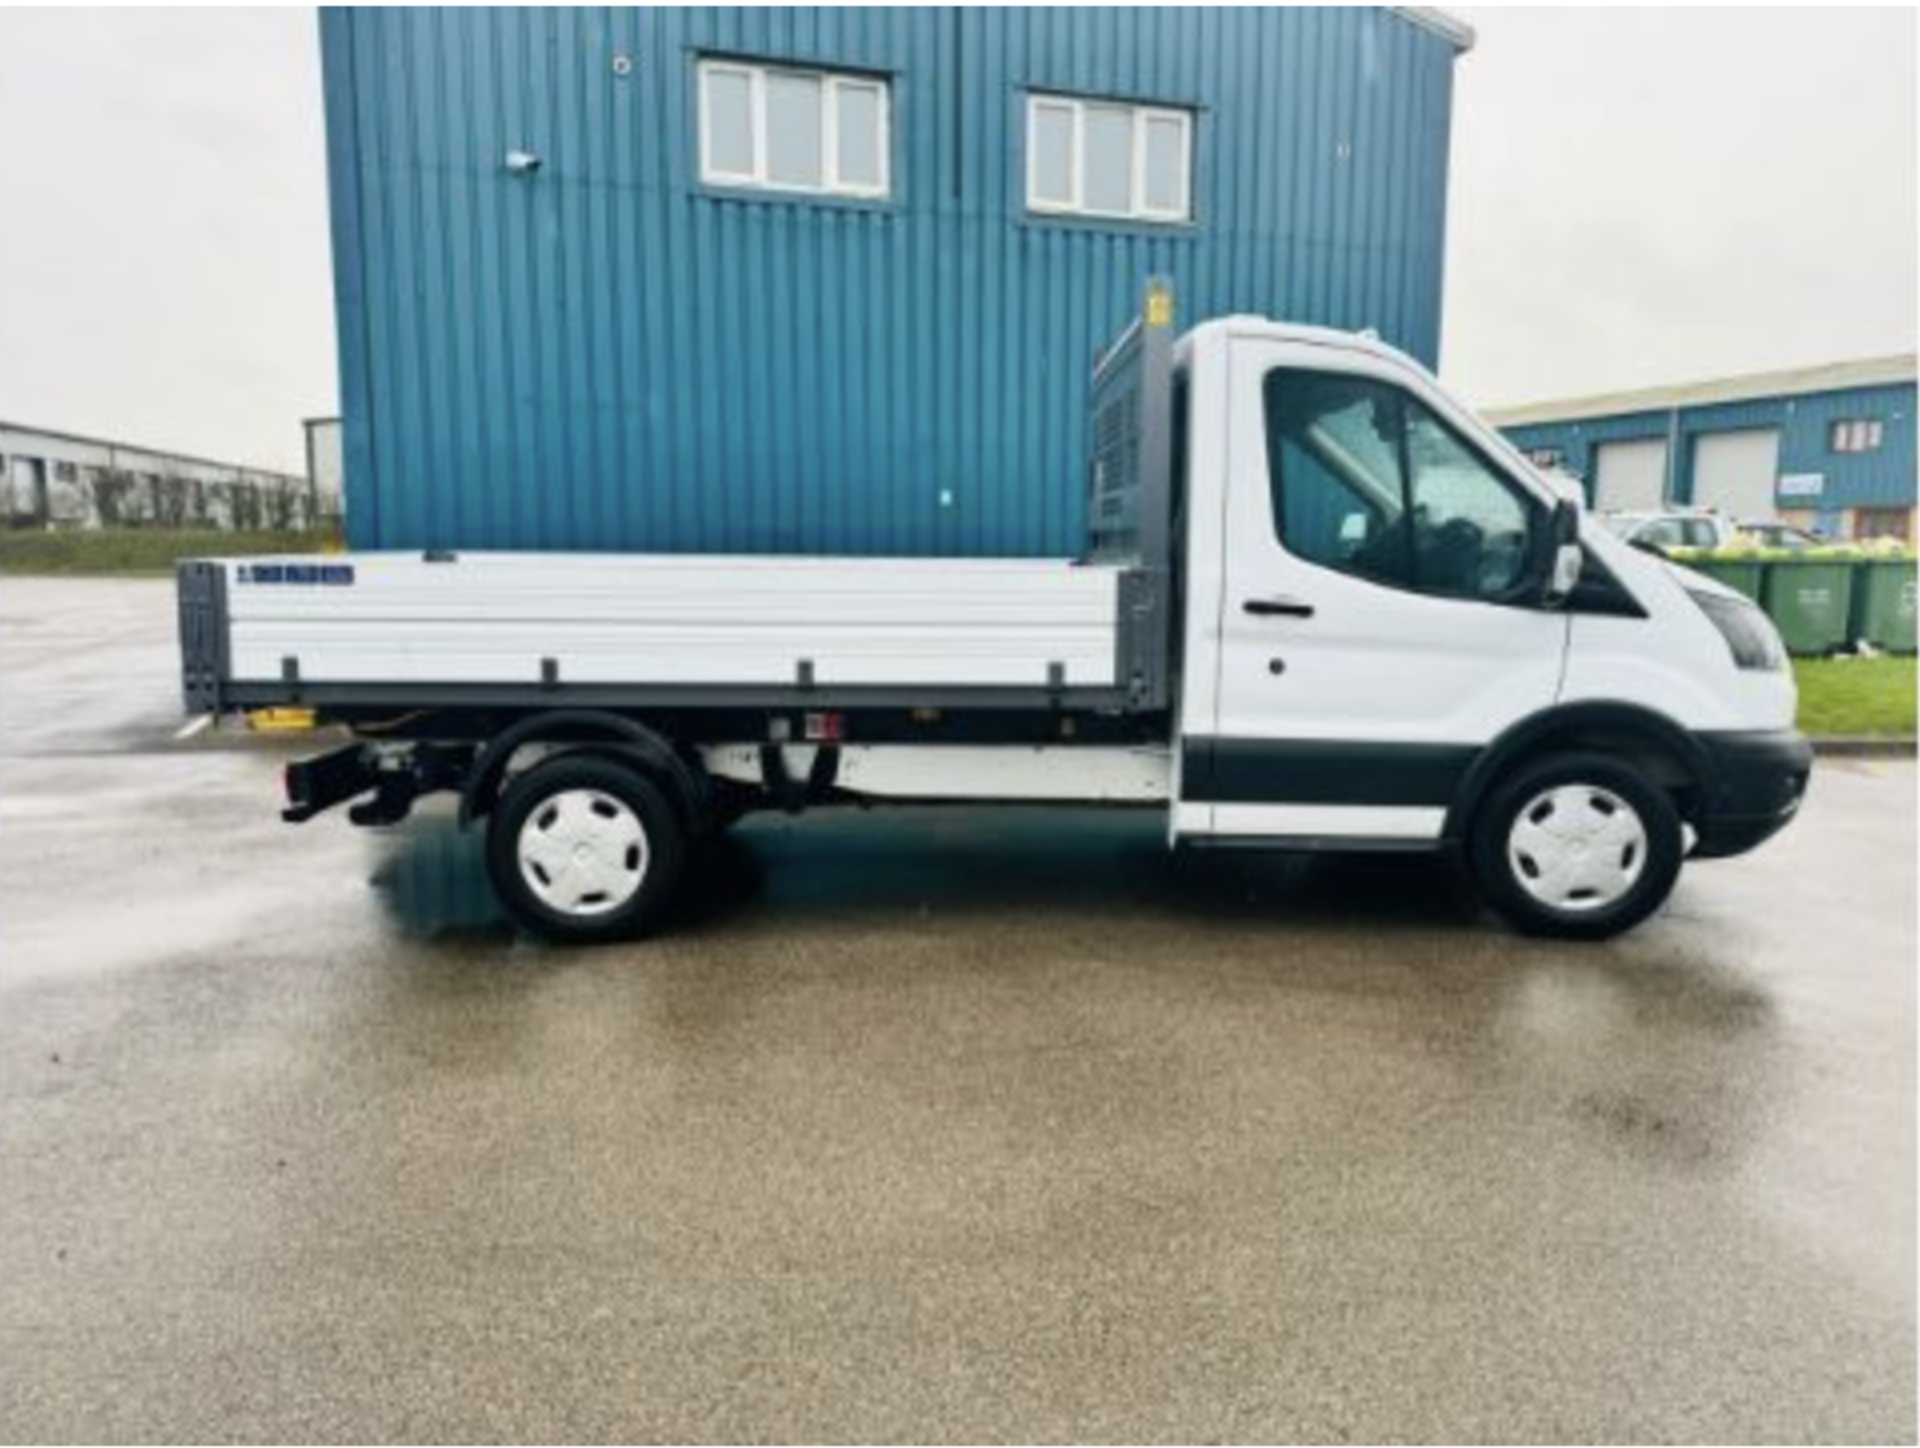 FORD TRANSIT 2.0 TIPPER130ps 'One Stop' Tipper - Manual - Diesel - 2.0 - Tipper Body 94.6k miles - Image 8 of 11